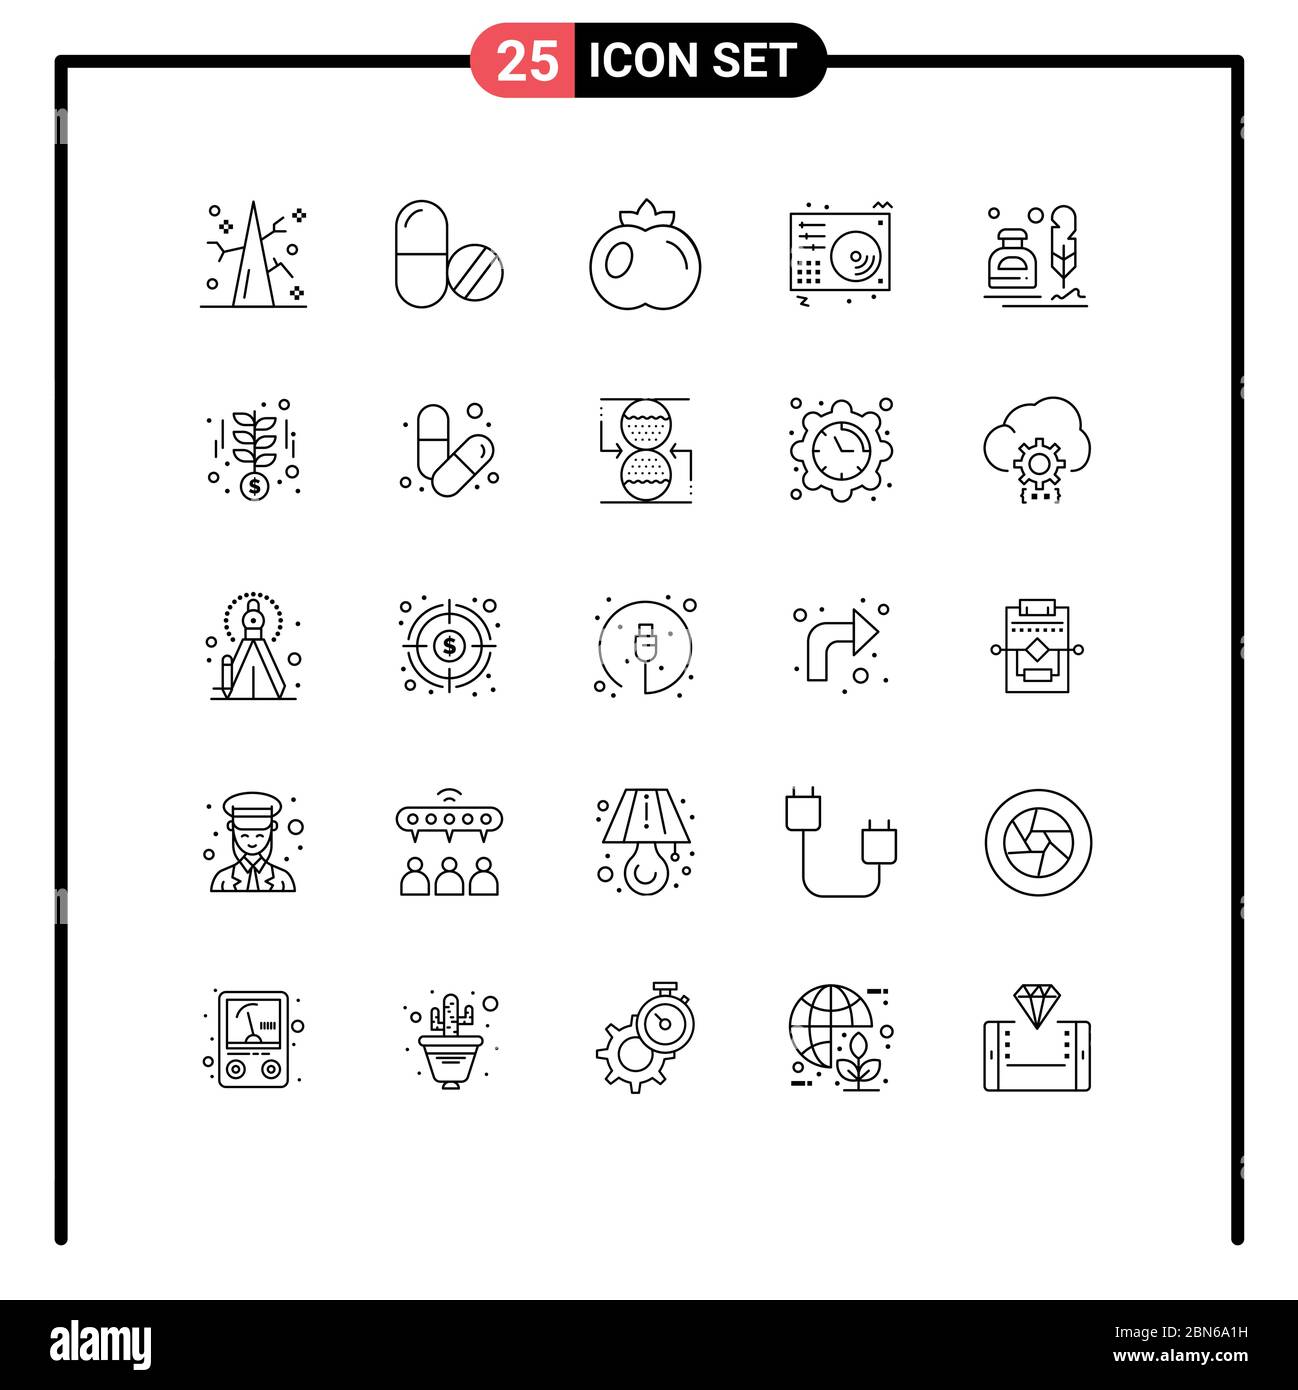 Mobile Interface Line Set of 25 Pictograms of erite, song, food, player, audio Editable Vector Design Elements Stock Vector